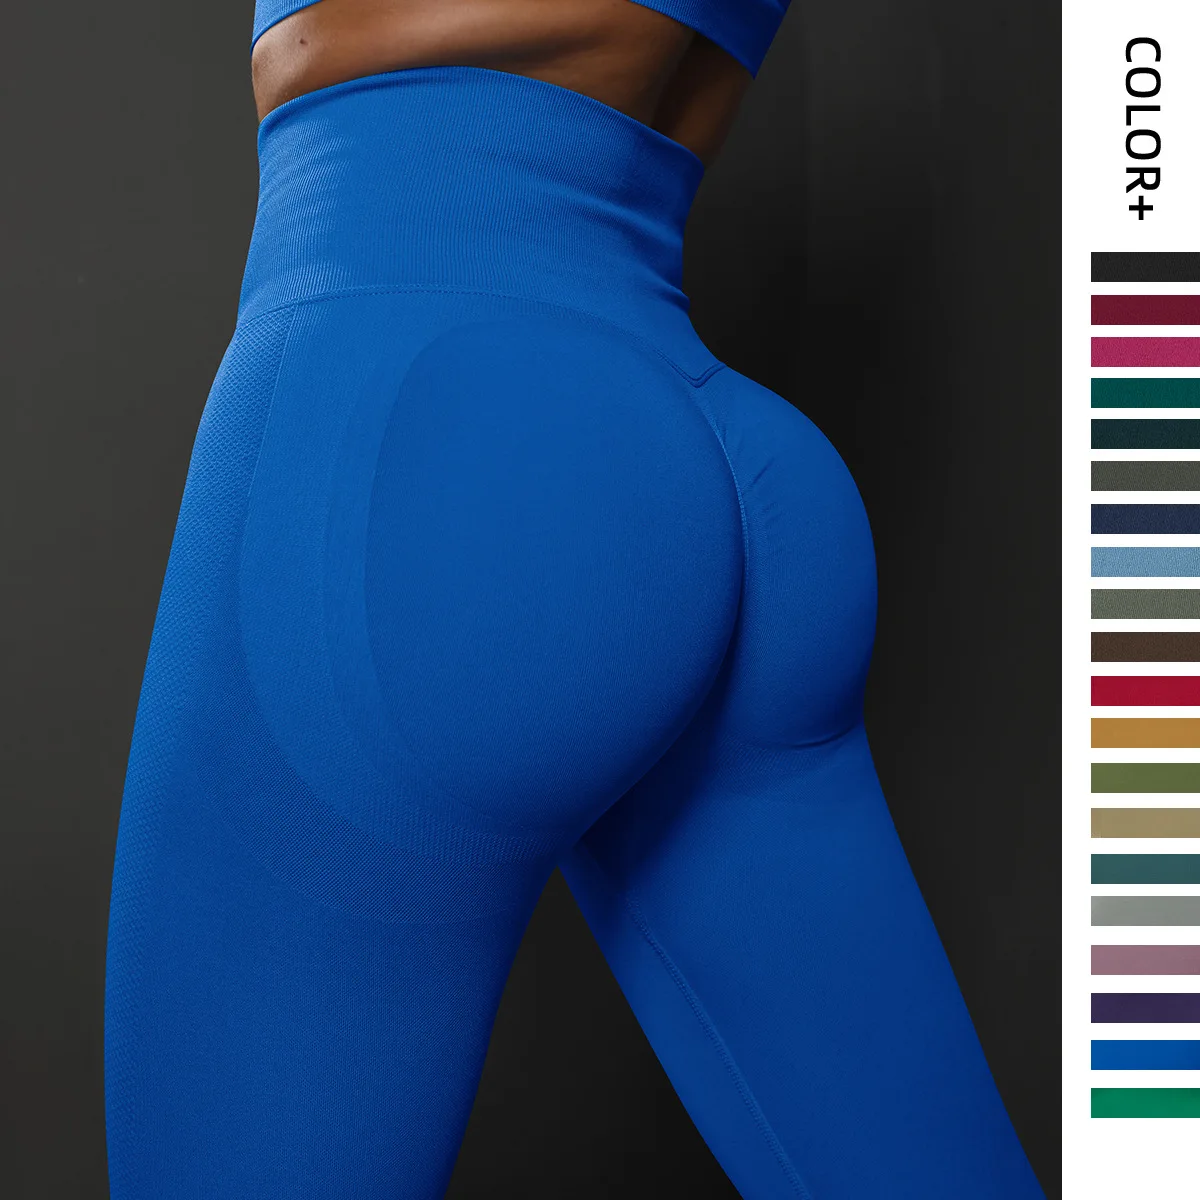 

Contour Seamless Leggings Womens Butt' Lift Curves Workout Tights Yoga Pants Gym Outfits Fitness Clothing Sports Wear Pink